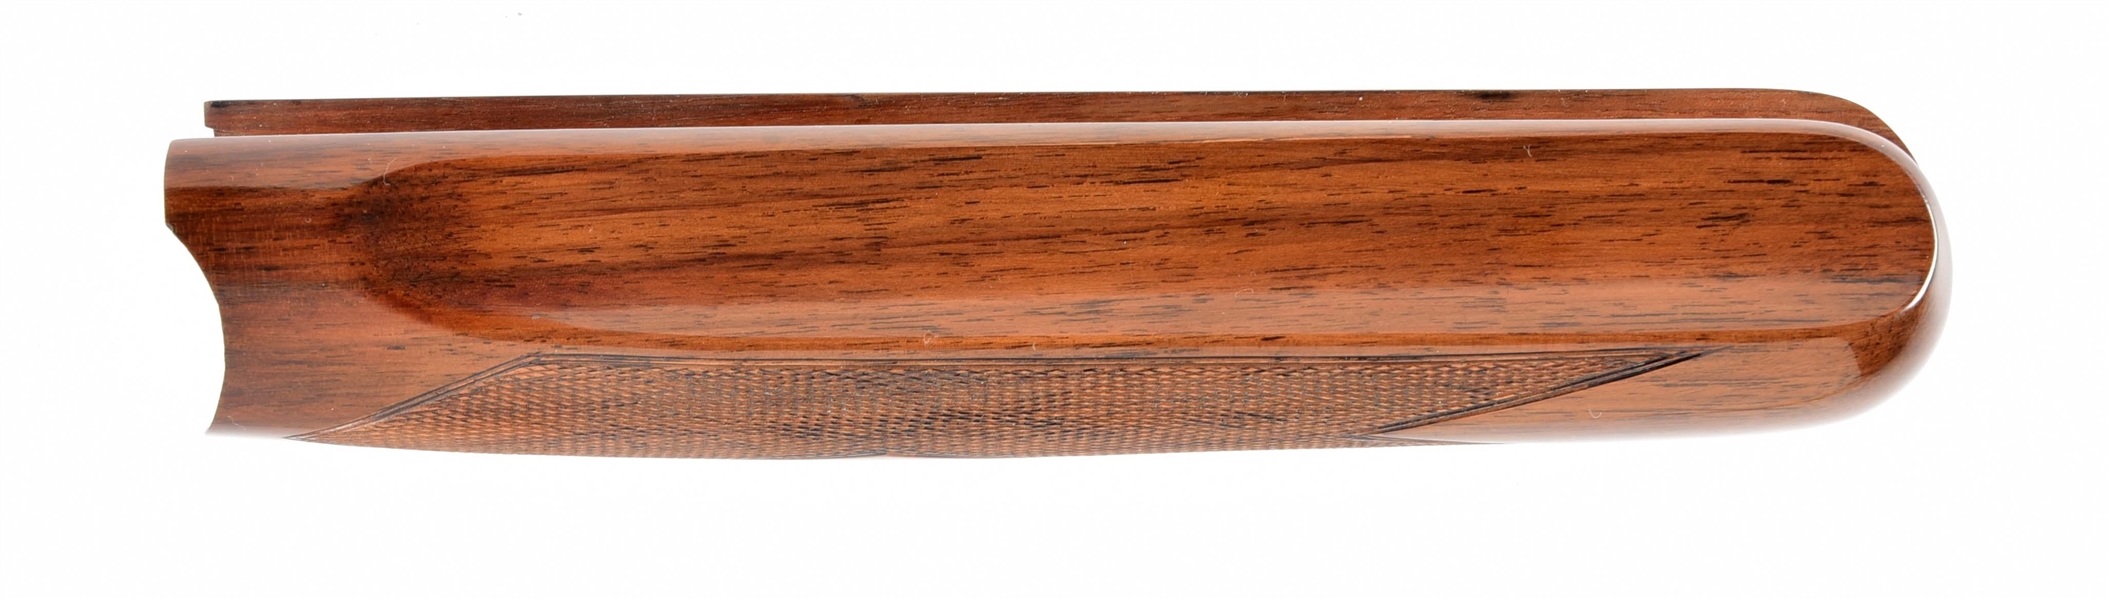 PERAZZI WOODEN FOREND 